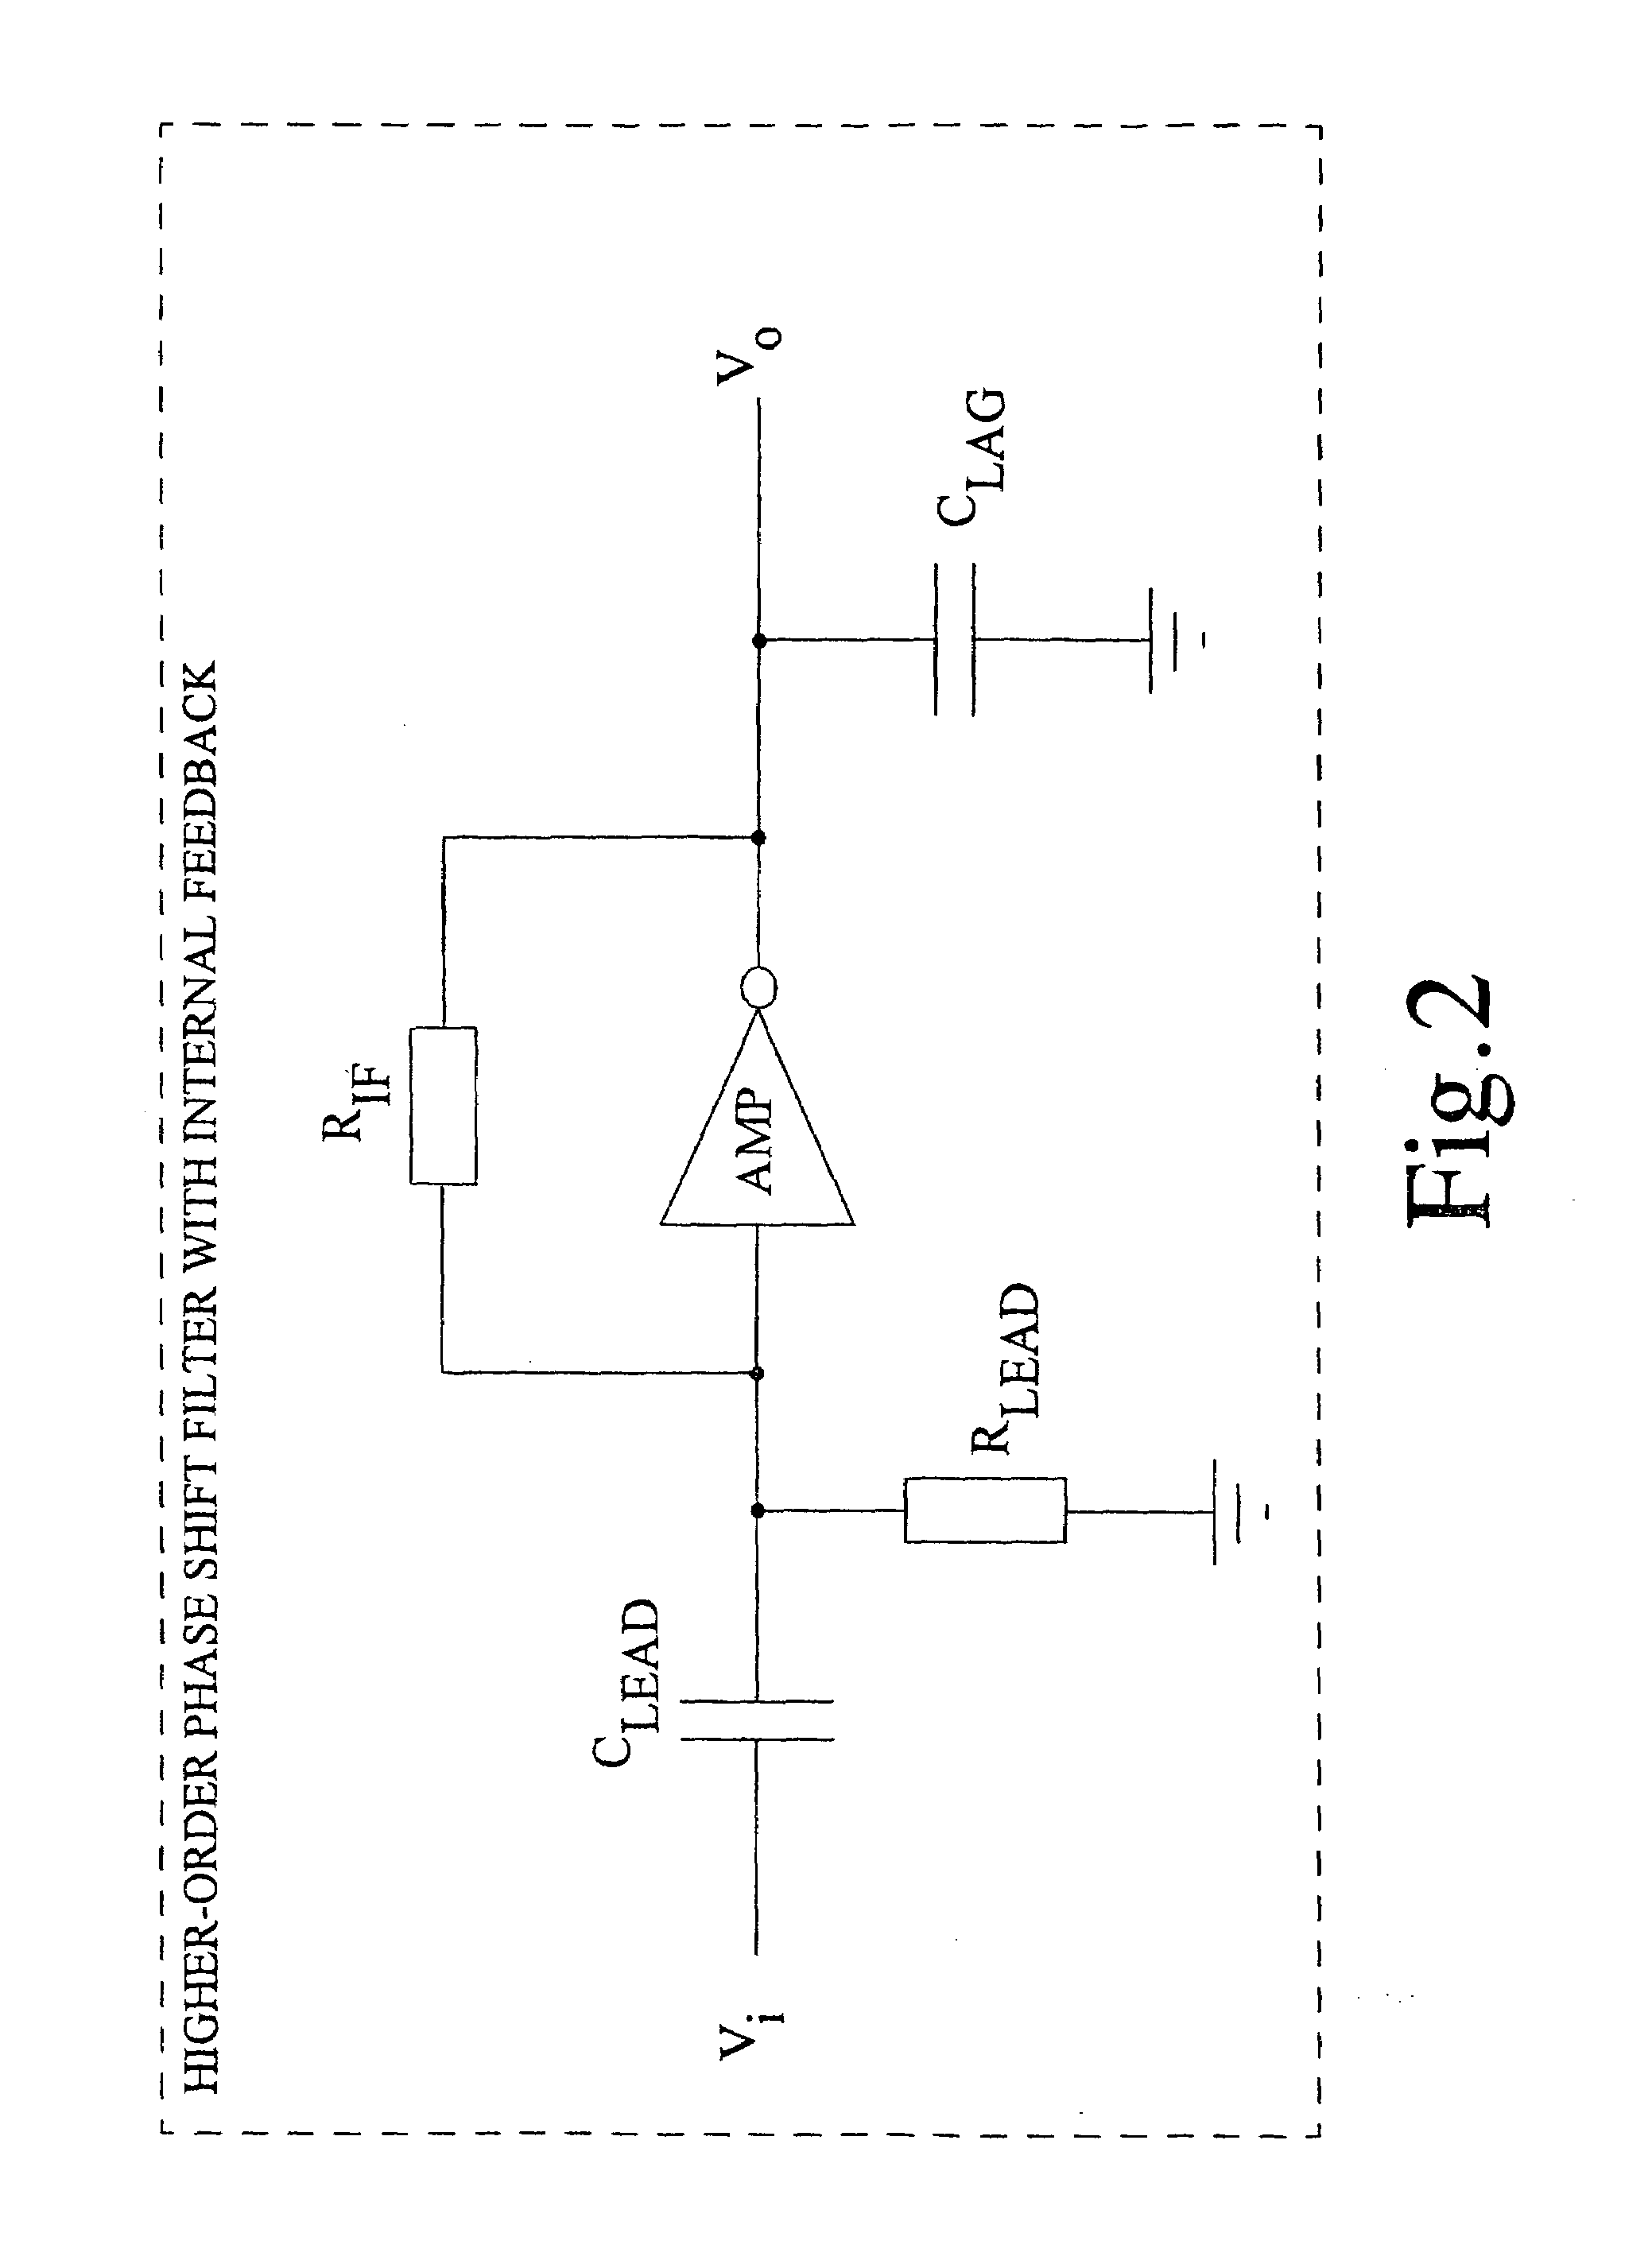 Oscillators with active higher-in-order phase shift filtering